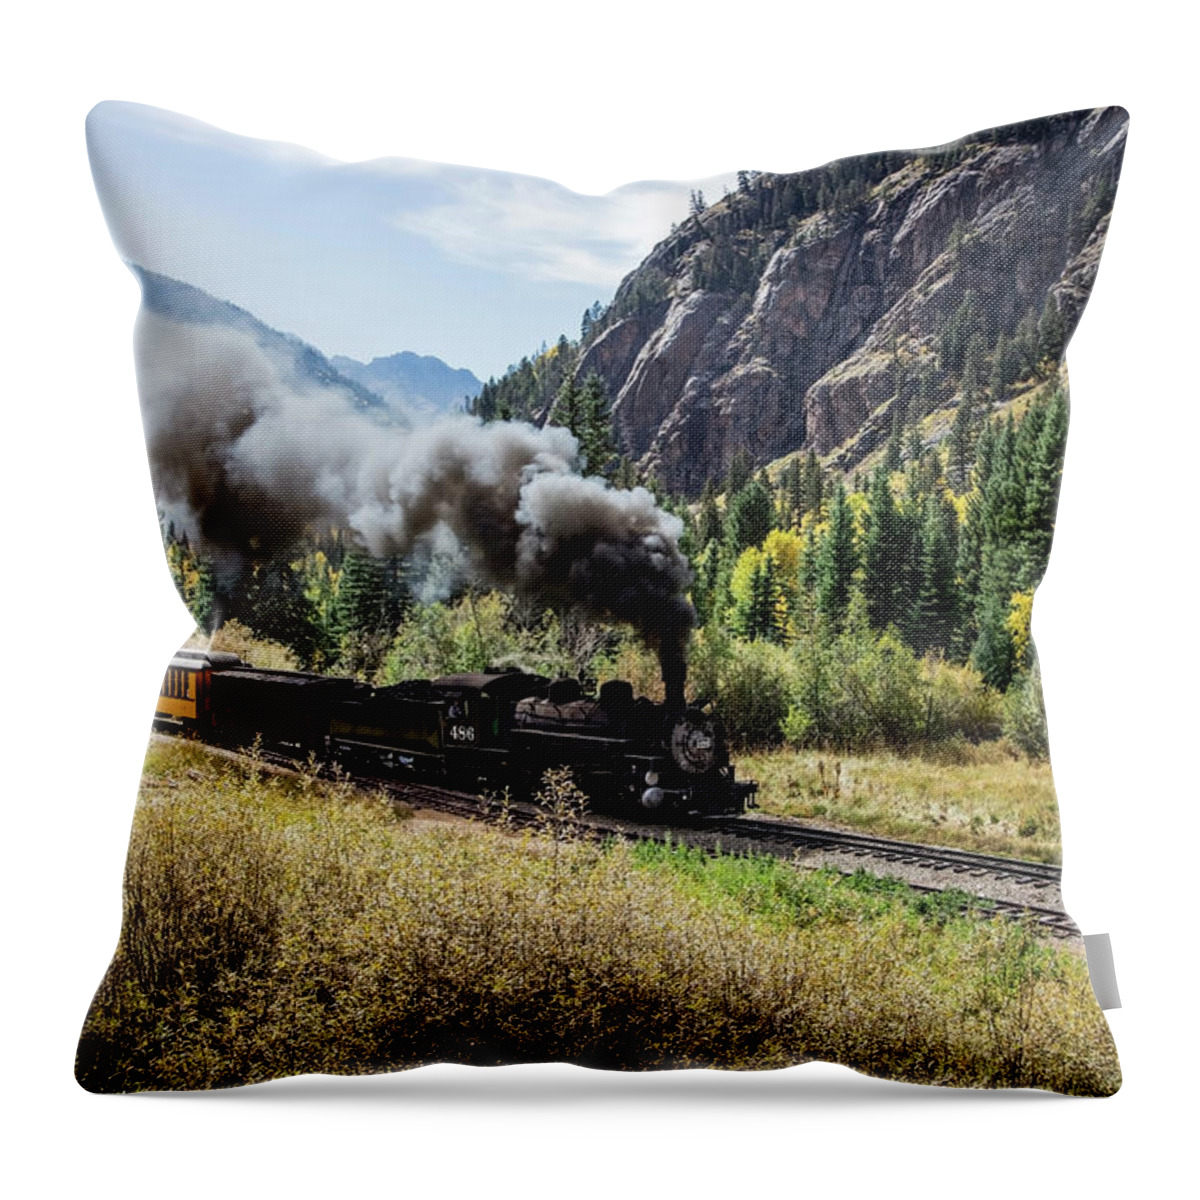 Transport Throw Pillow featuring the photograph Scenic Railroad train by Mango Art